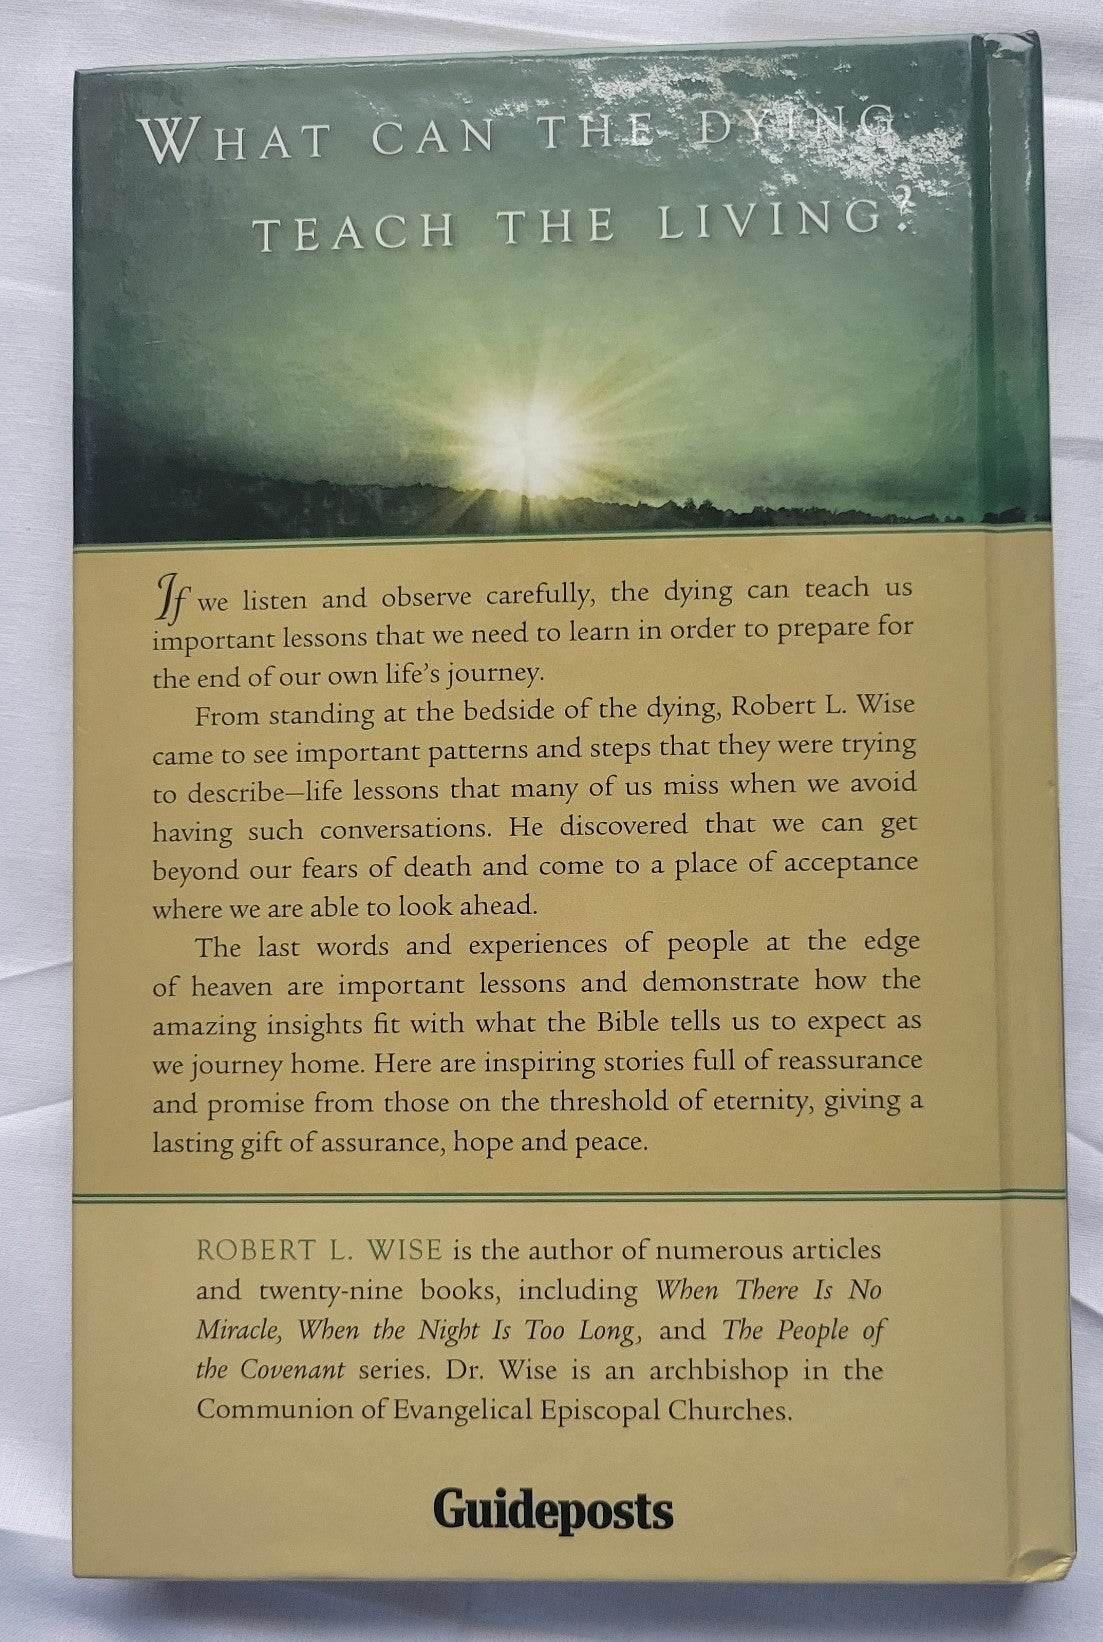 Used book "Crossing the Threshold of Eternity: What the Dying Can Teach the Living" by Dr. Robert L. Wise, published by Gospel Light, 2007. View of back cover.